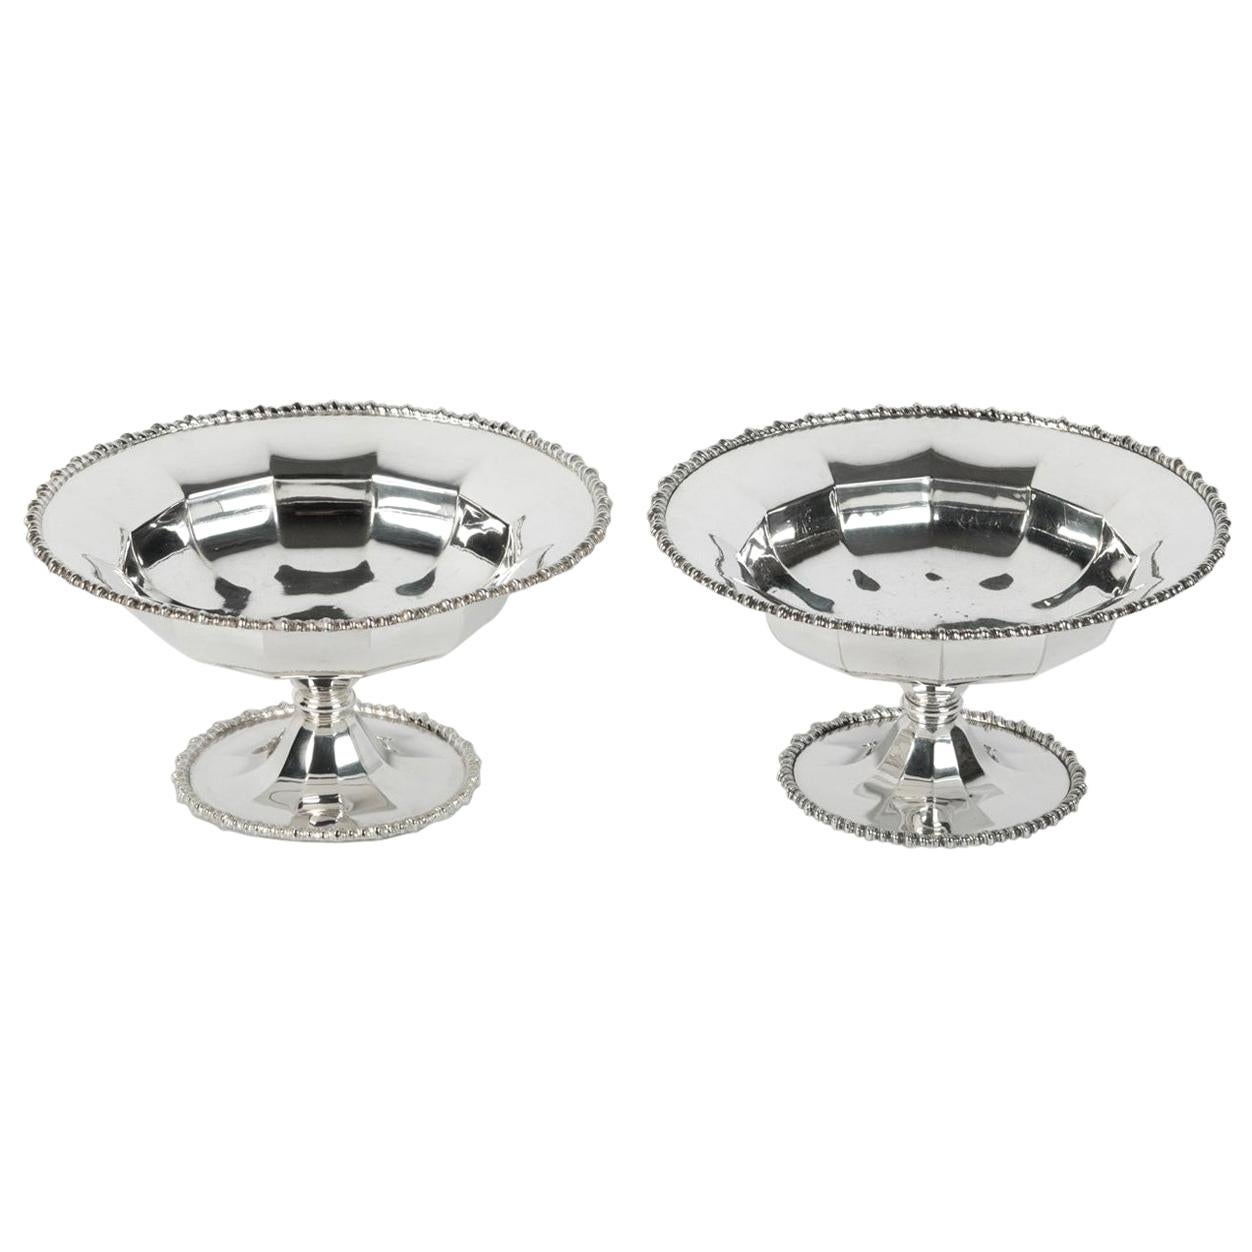 Mid-20th Century English Silver Plate Compote Set For Sale